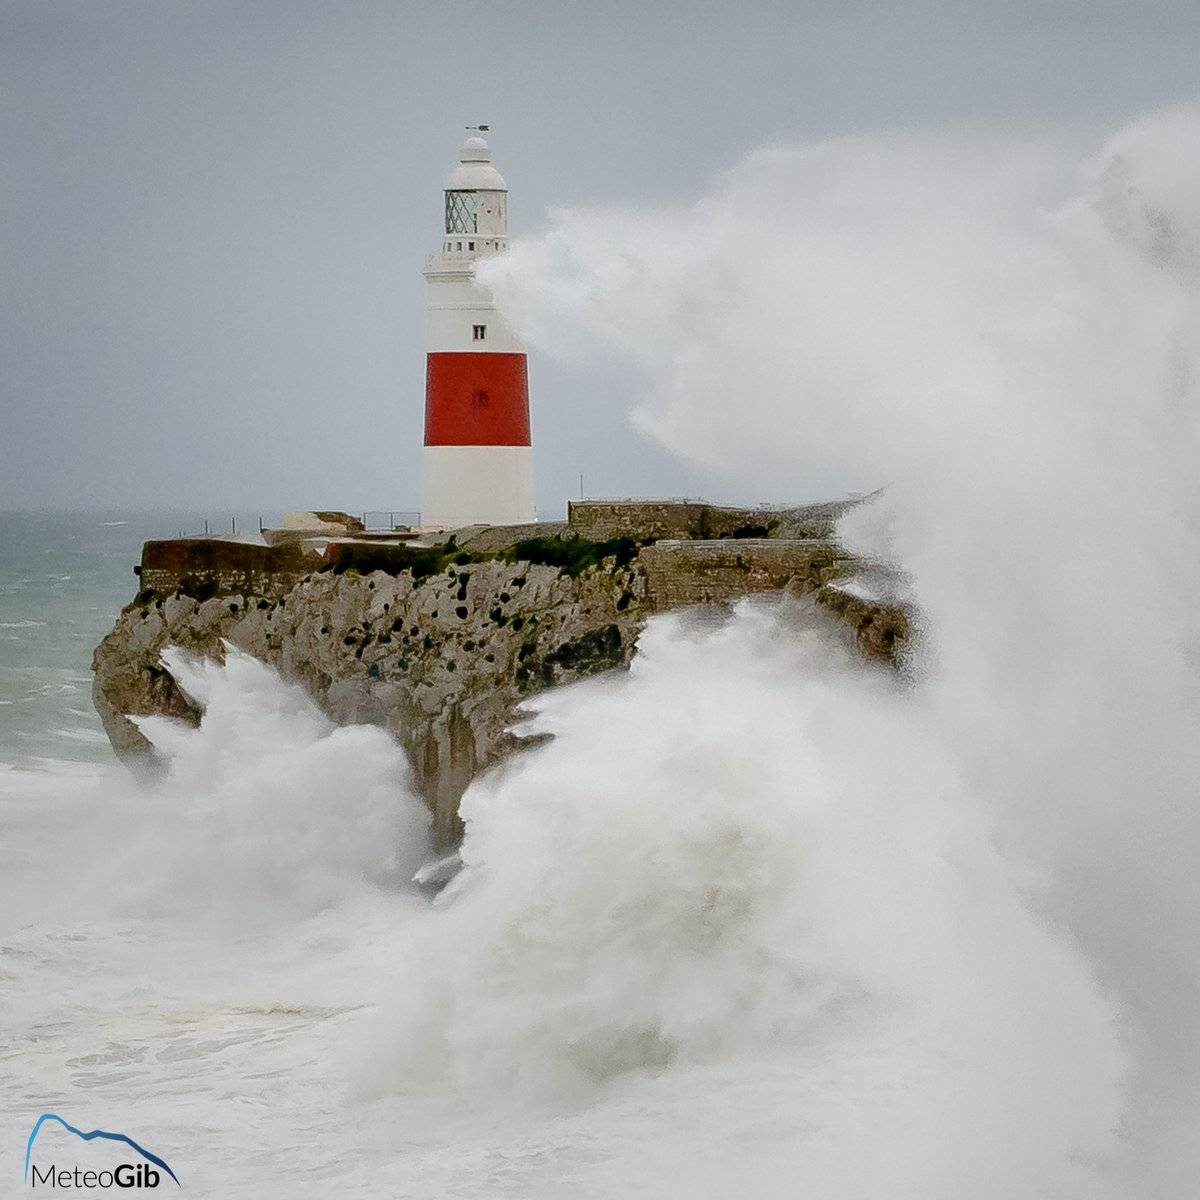 1st Place MeteoGib @MeteoGib Gibraltar Europa Point Lighthouse being pounded for a second day by a gale force levanter winds